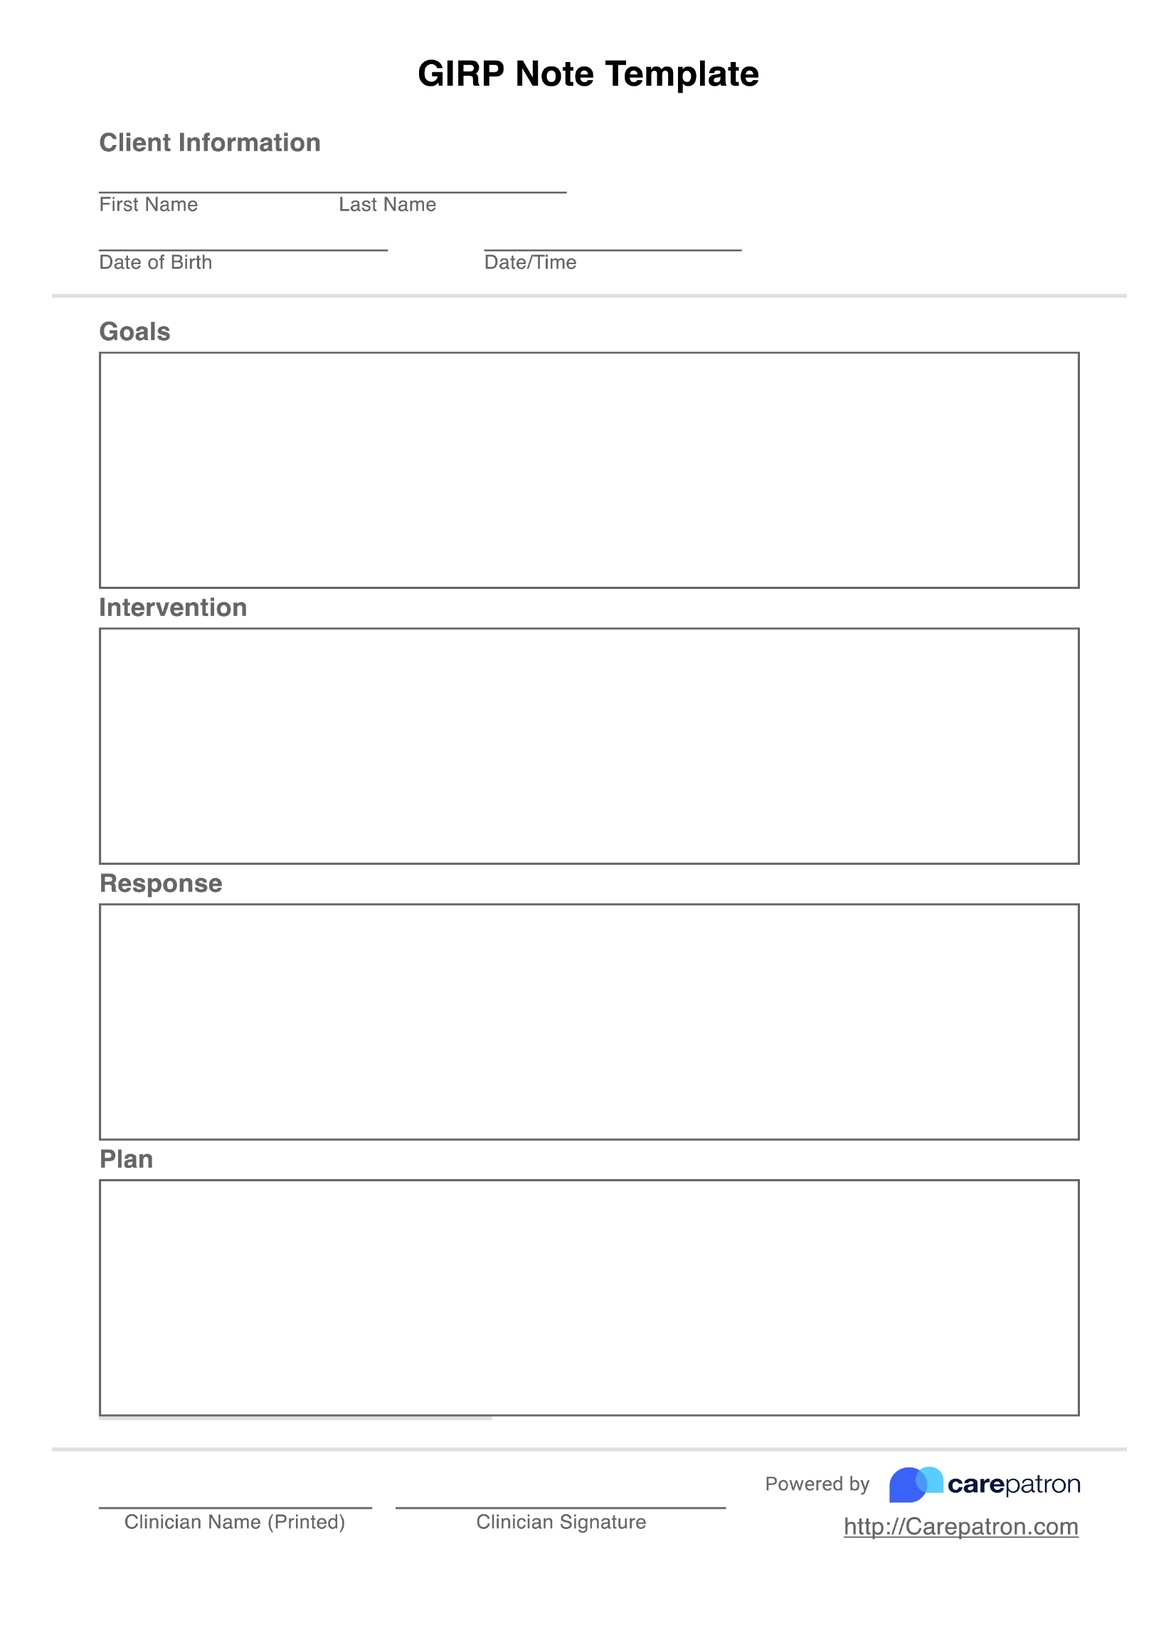 GIRP Notes Template PDF Example